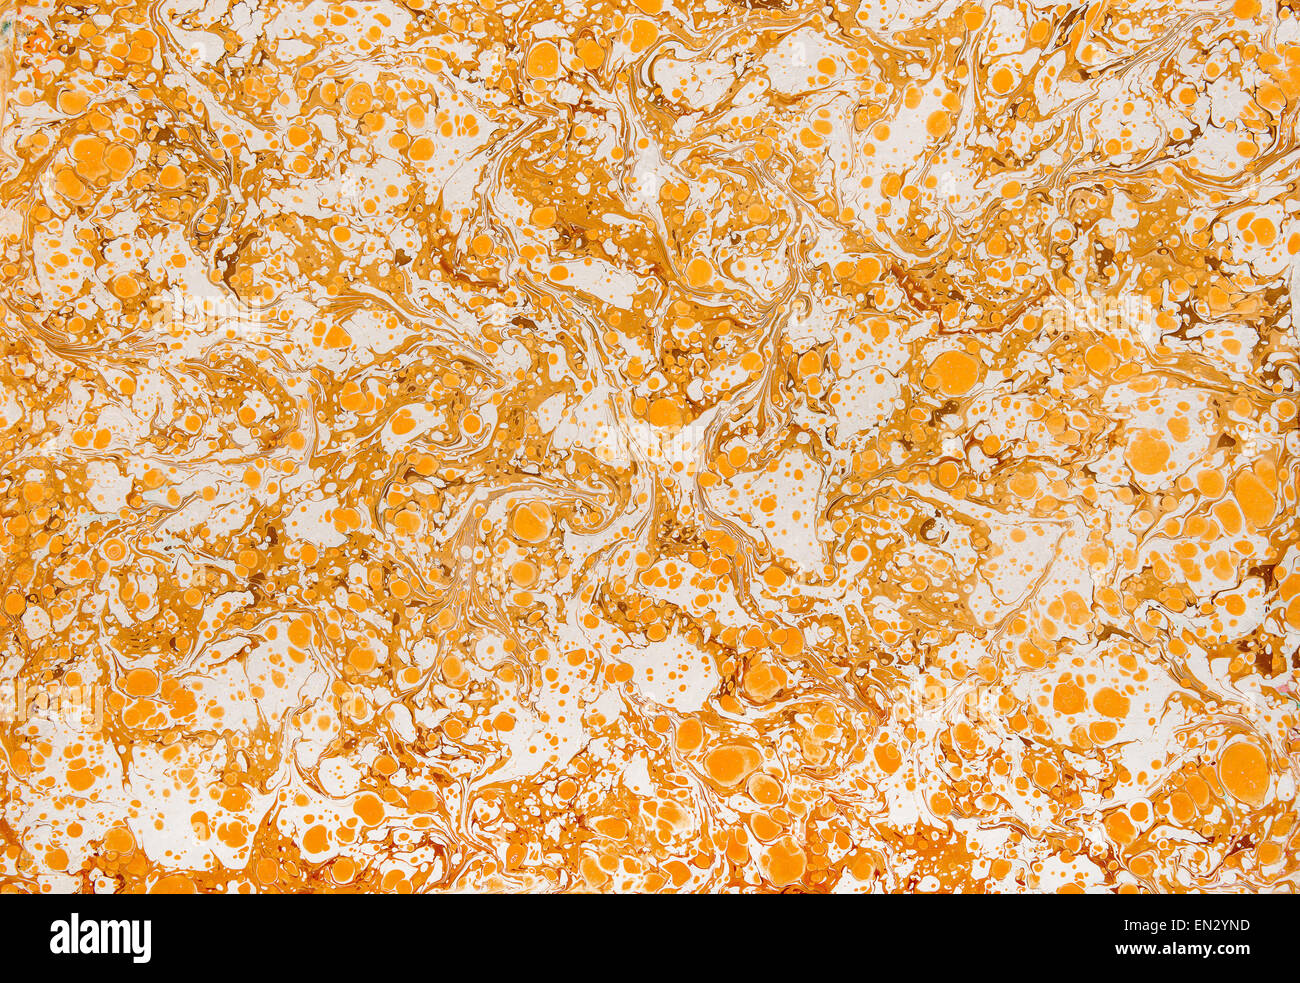 Mottled yellow and white paper pattern Stock Photo